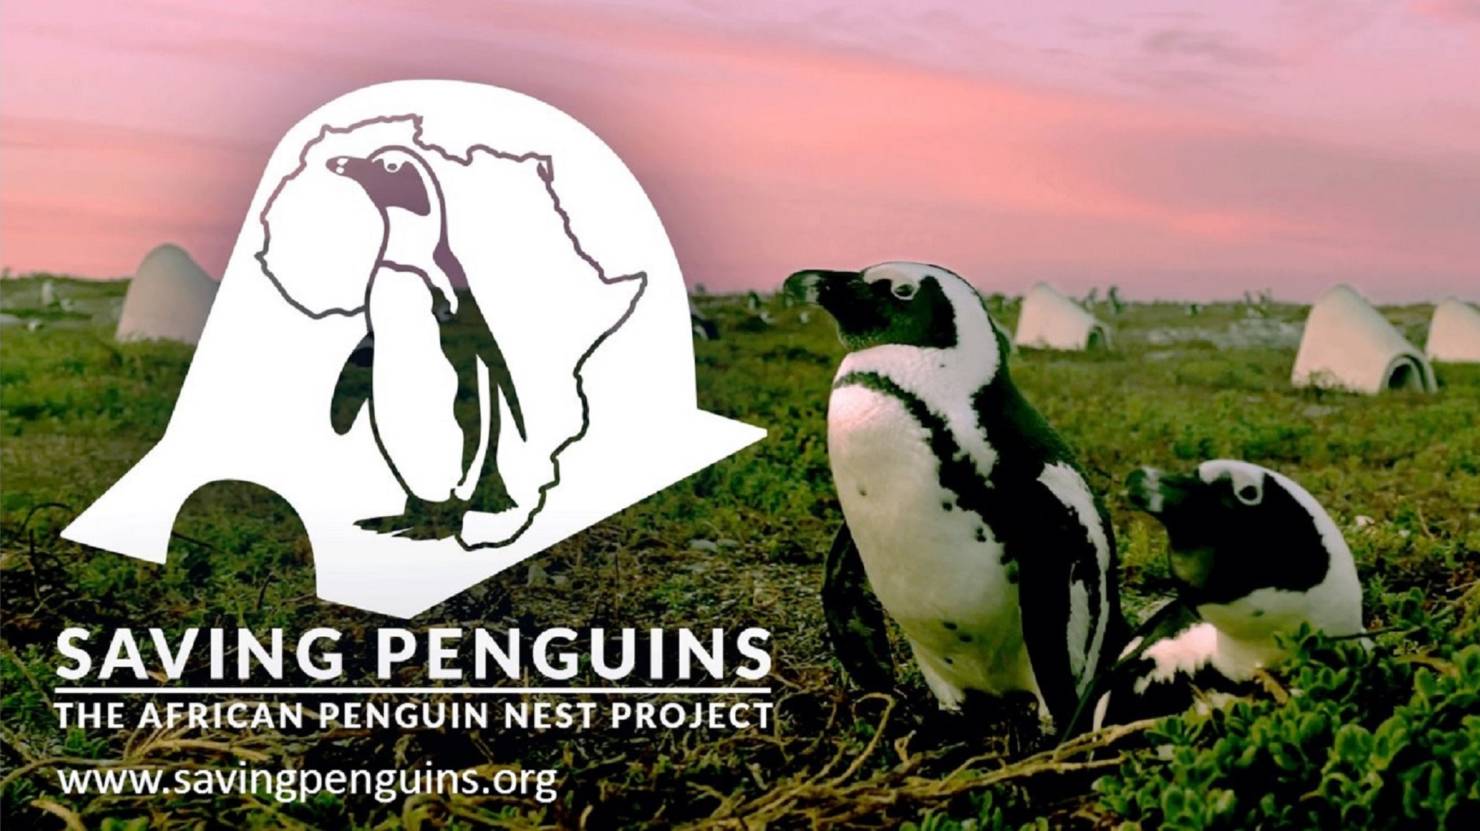 African penguins face long odds – but new homes can stack the deck